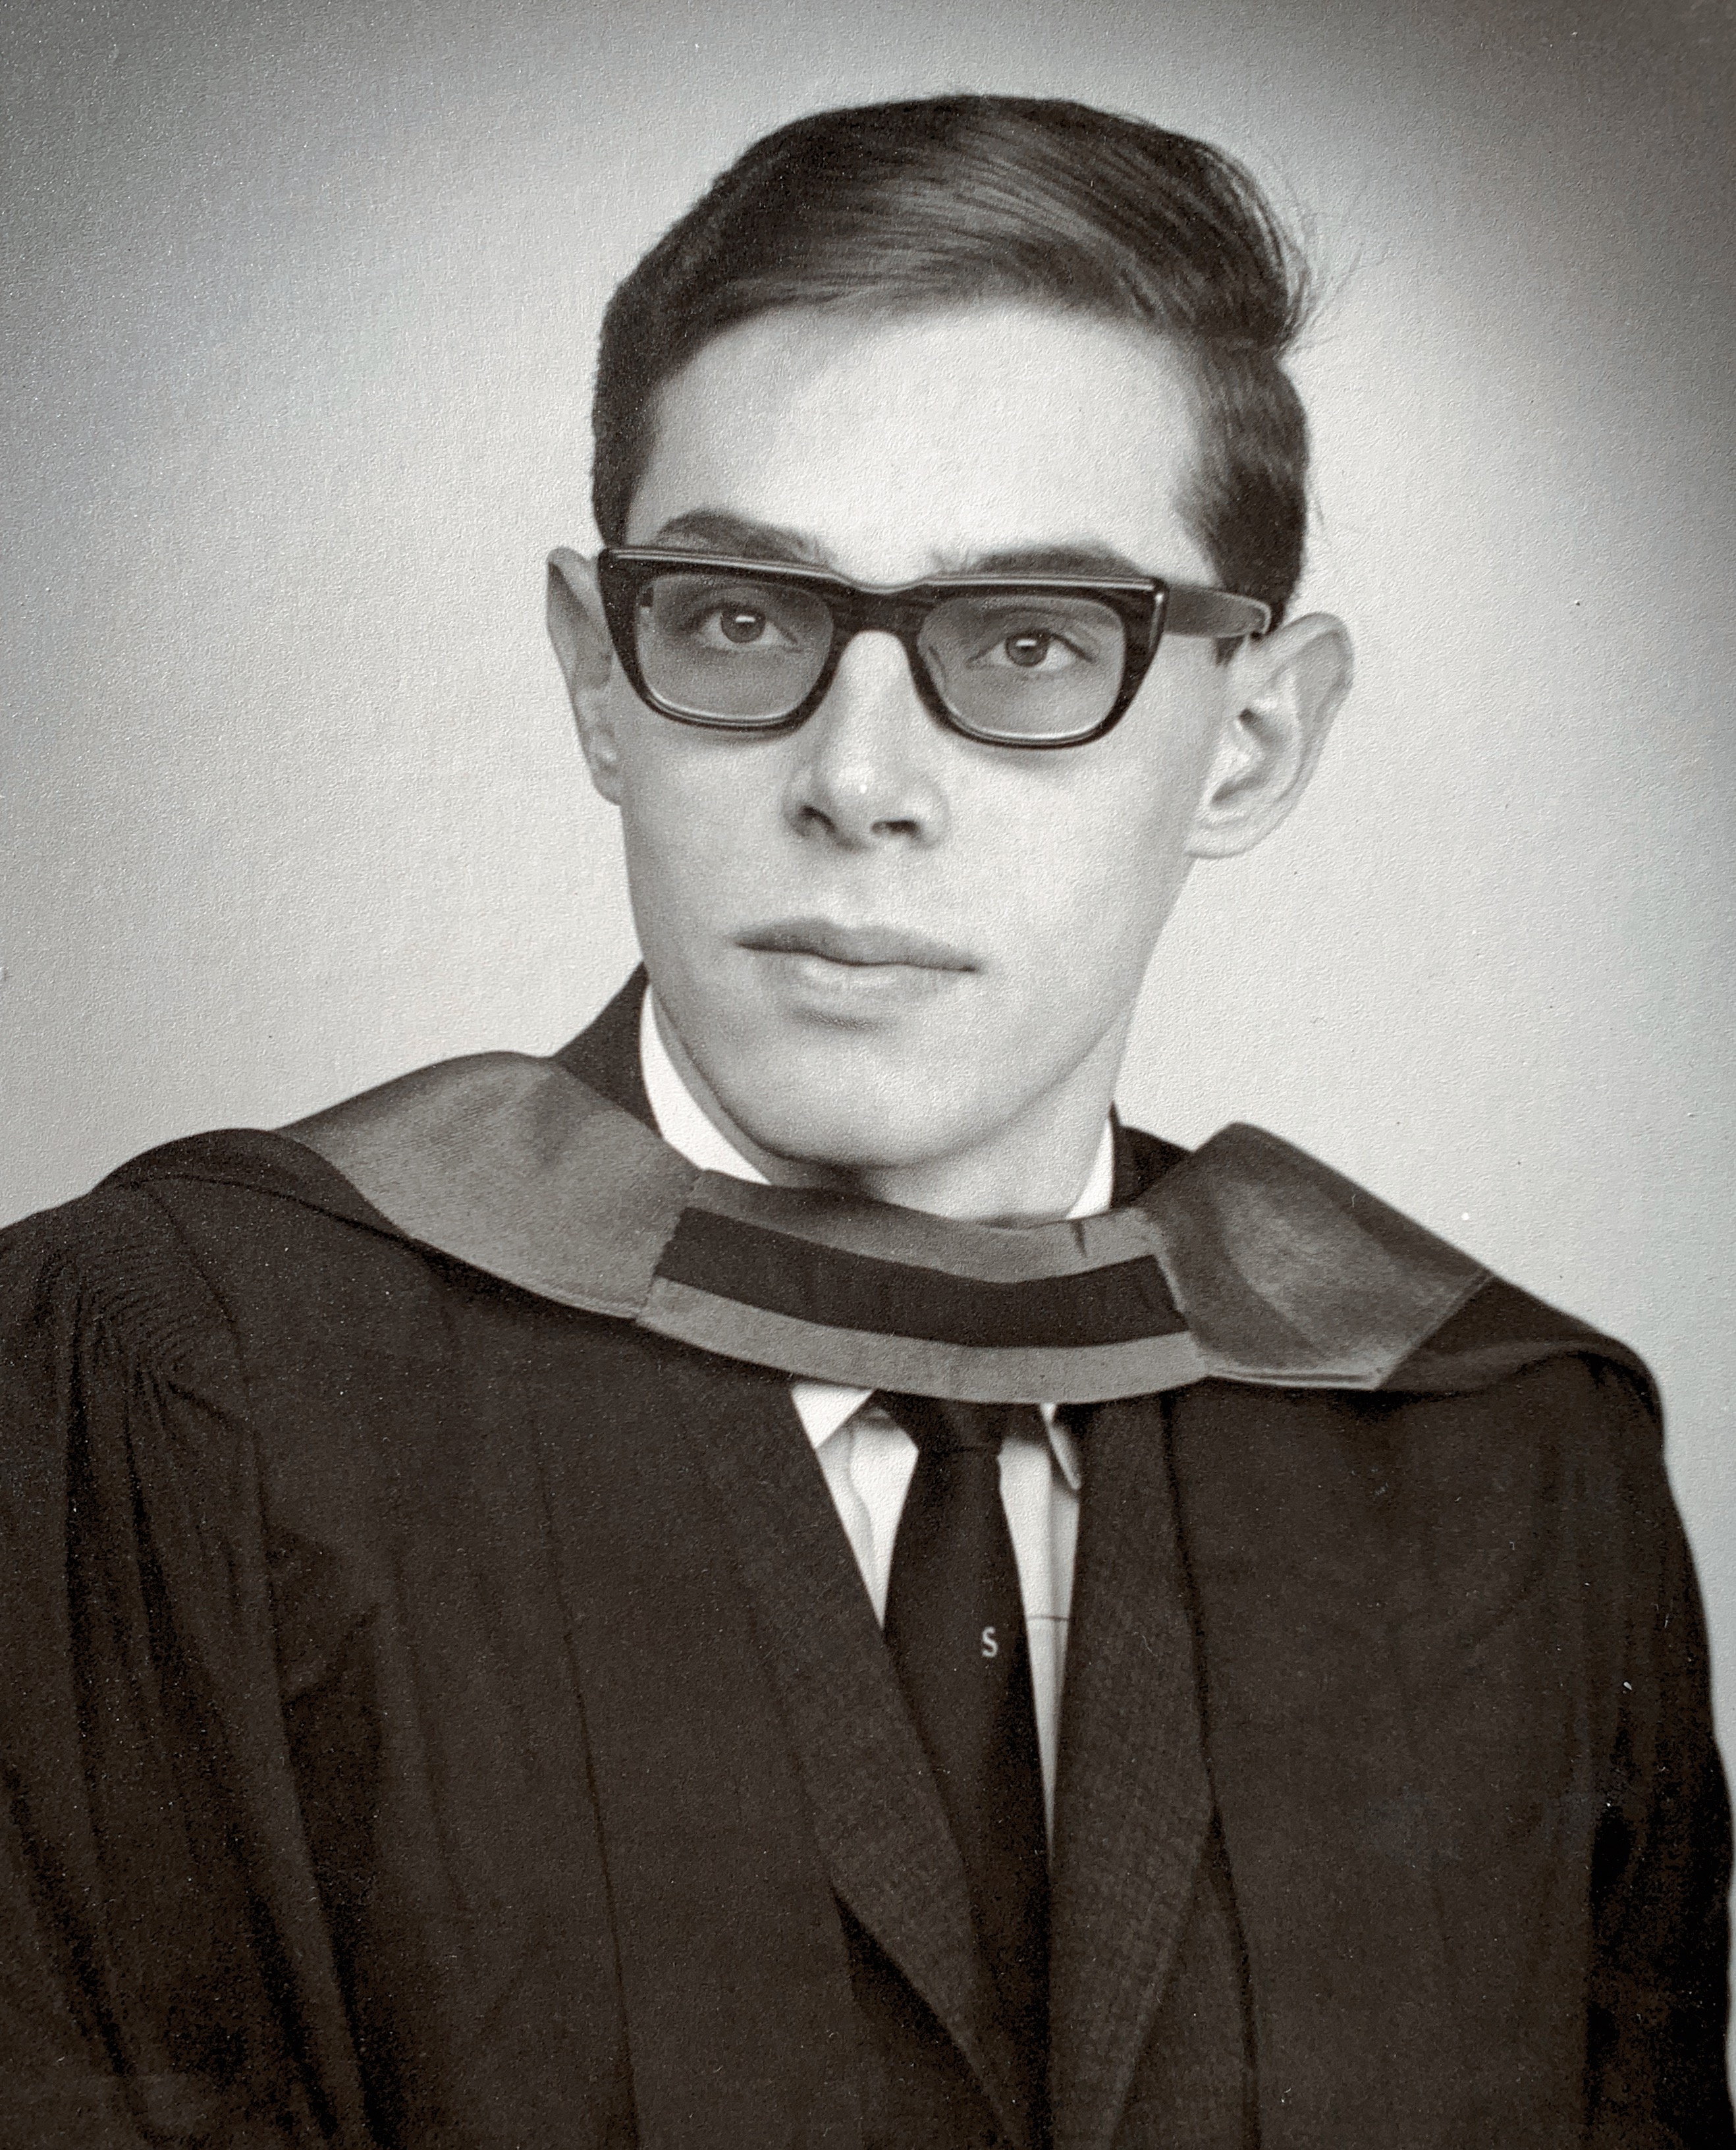 Stan’s graduation from university of the Witwatersrand Faculty of Commerce final year 1965